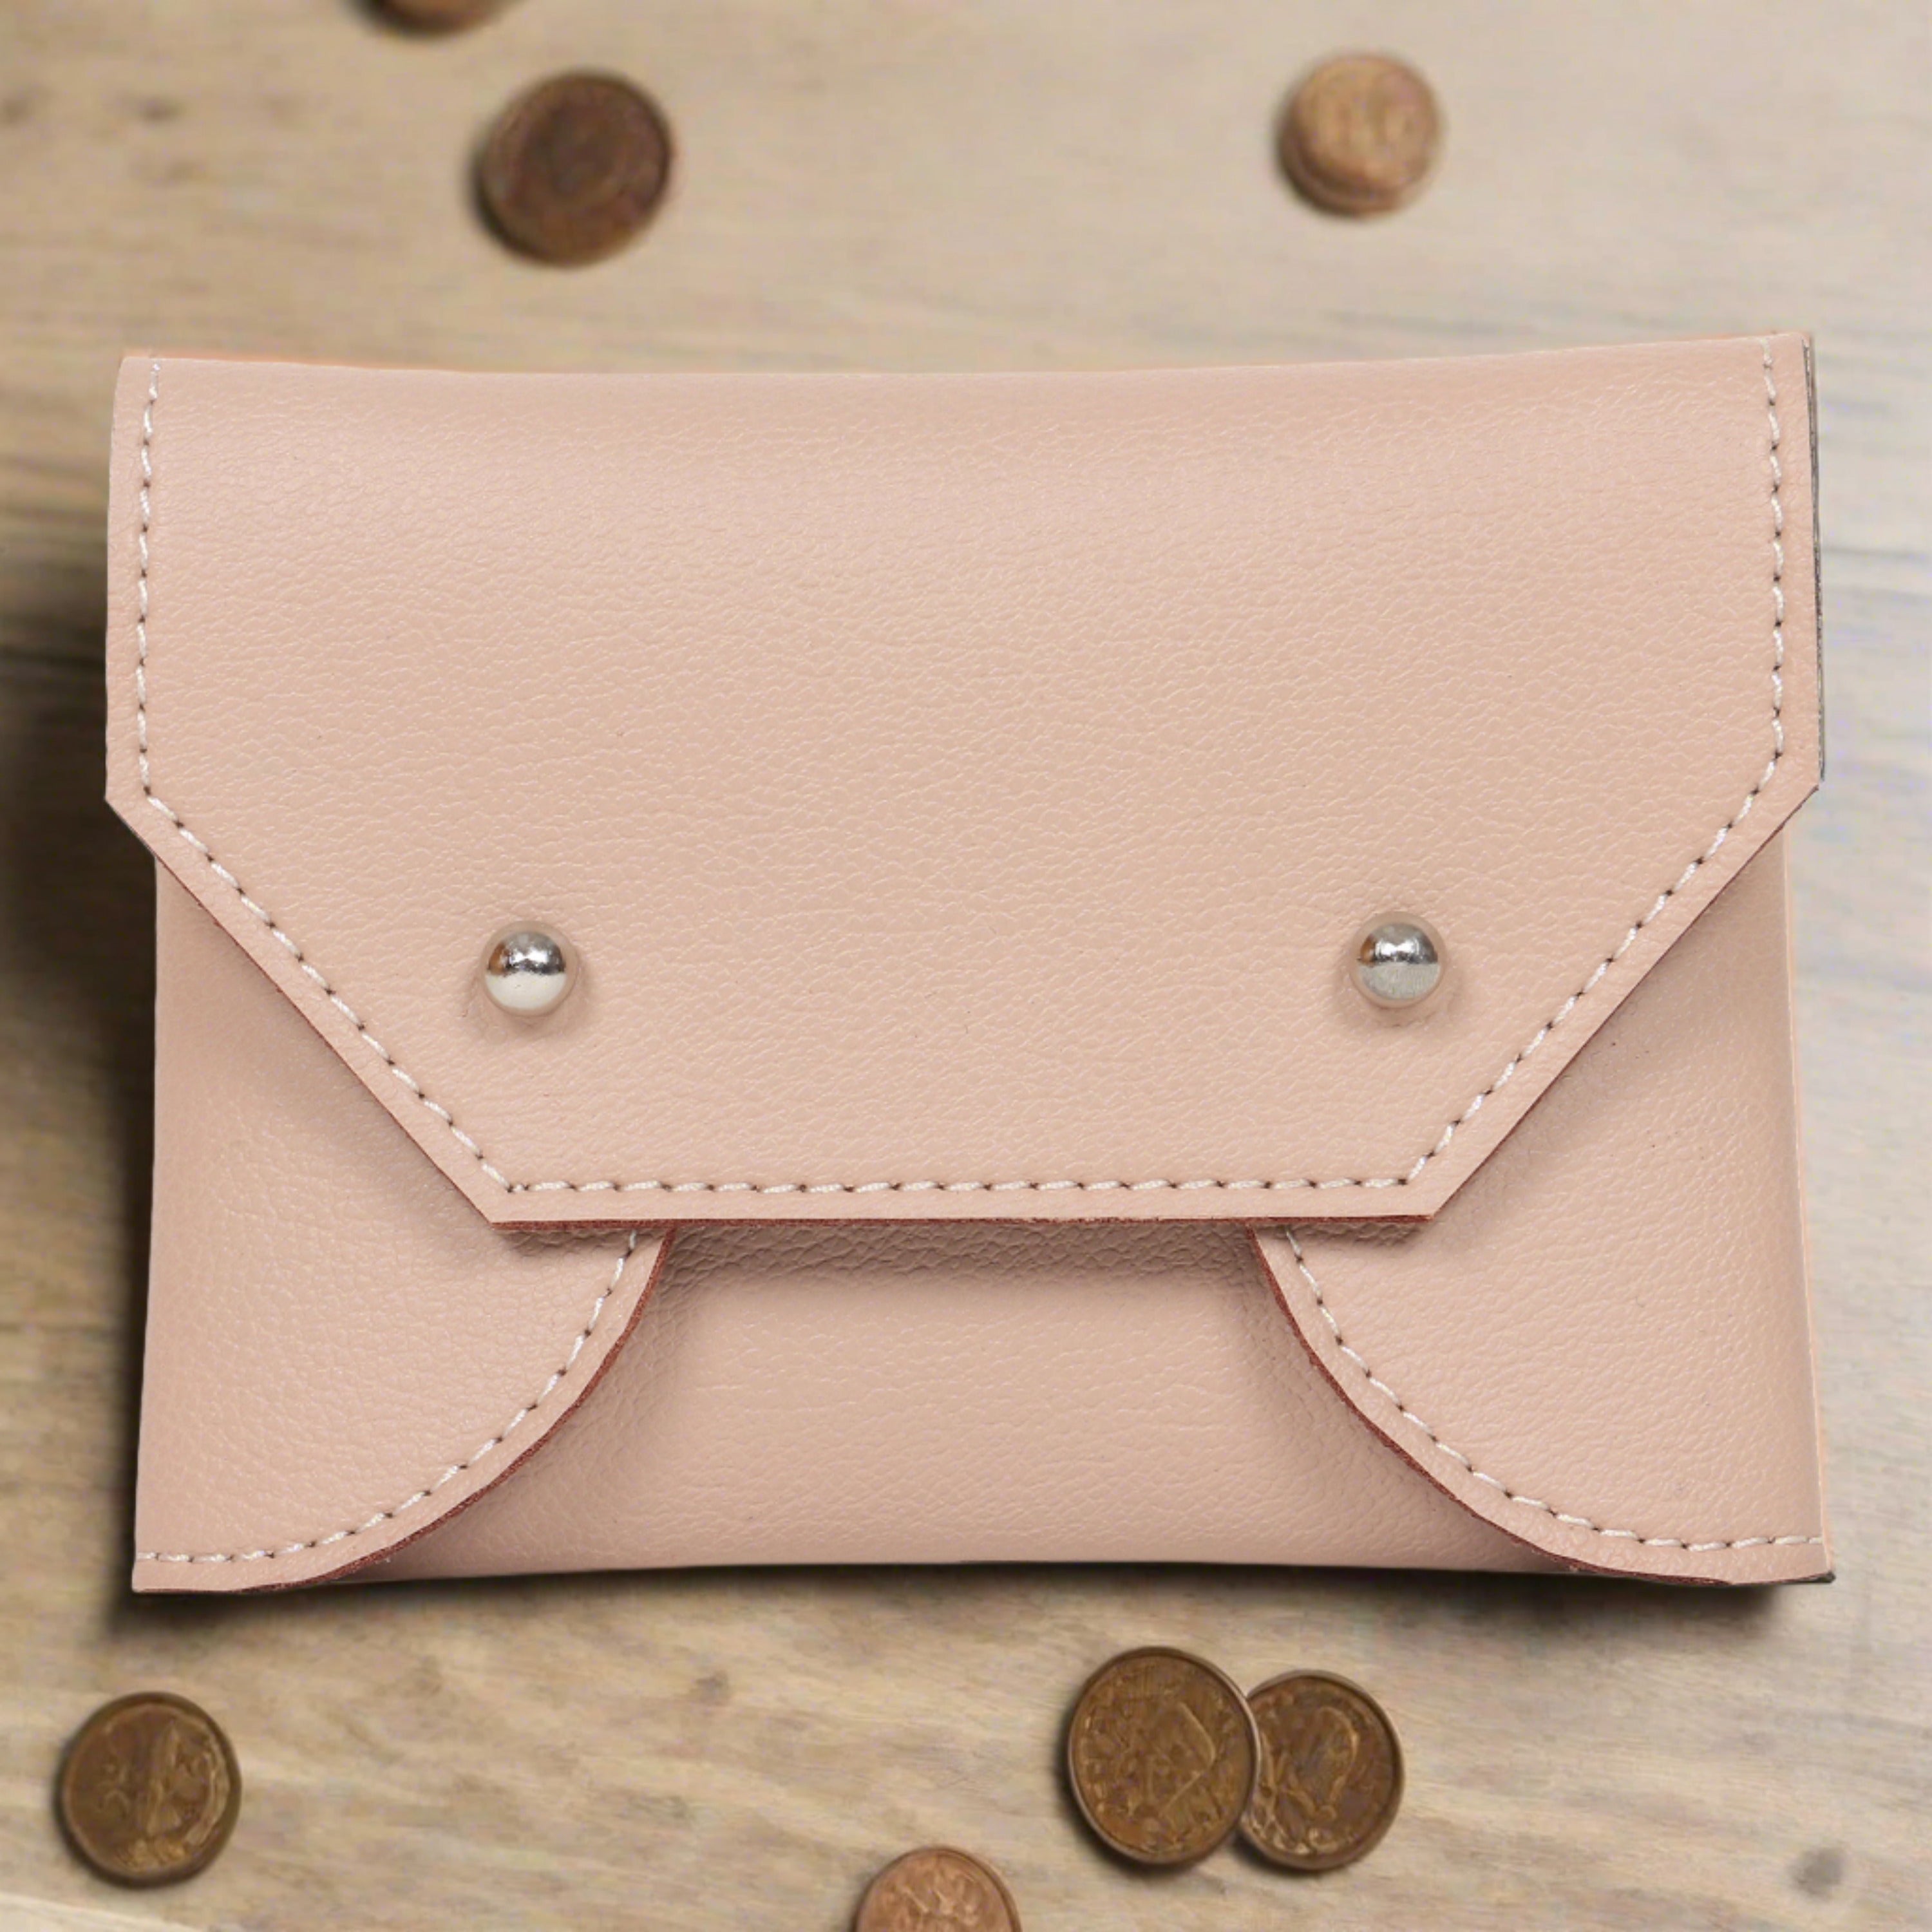 Vegan Leather Coin Pouch